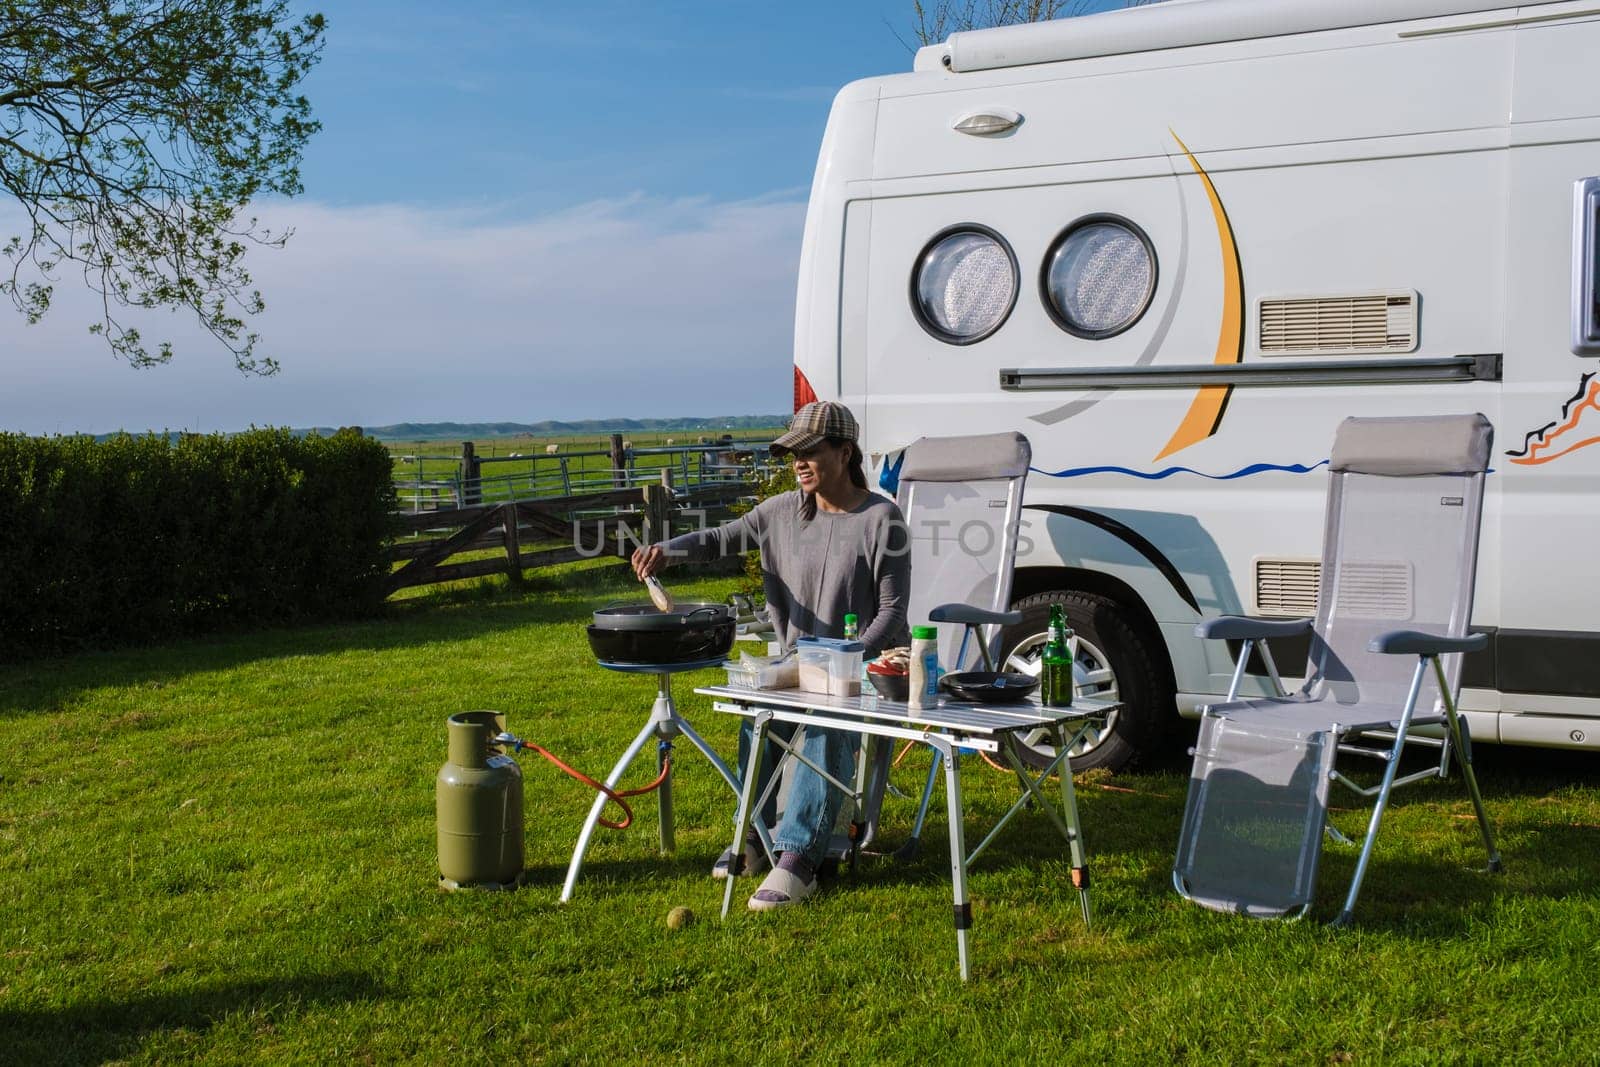 A woman sits quietly at a table, with an RV in the background. The scene exudes a sense of peace and anticipation for the journey ahead by fokkebok